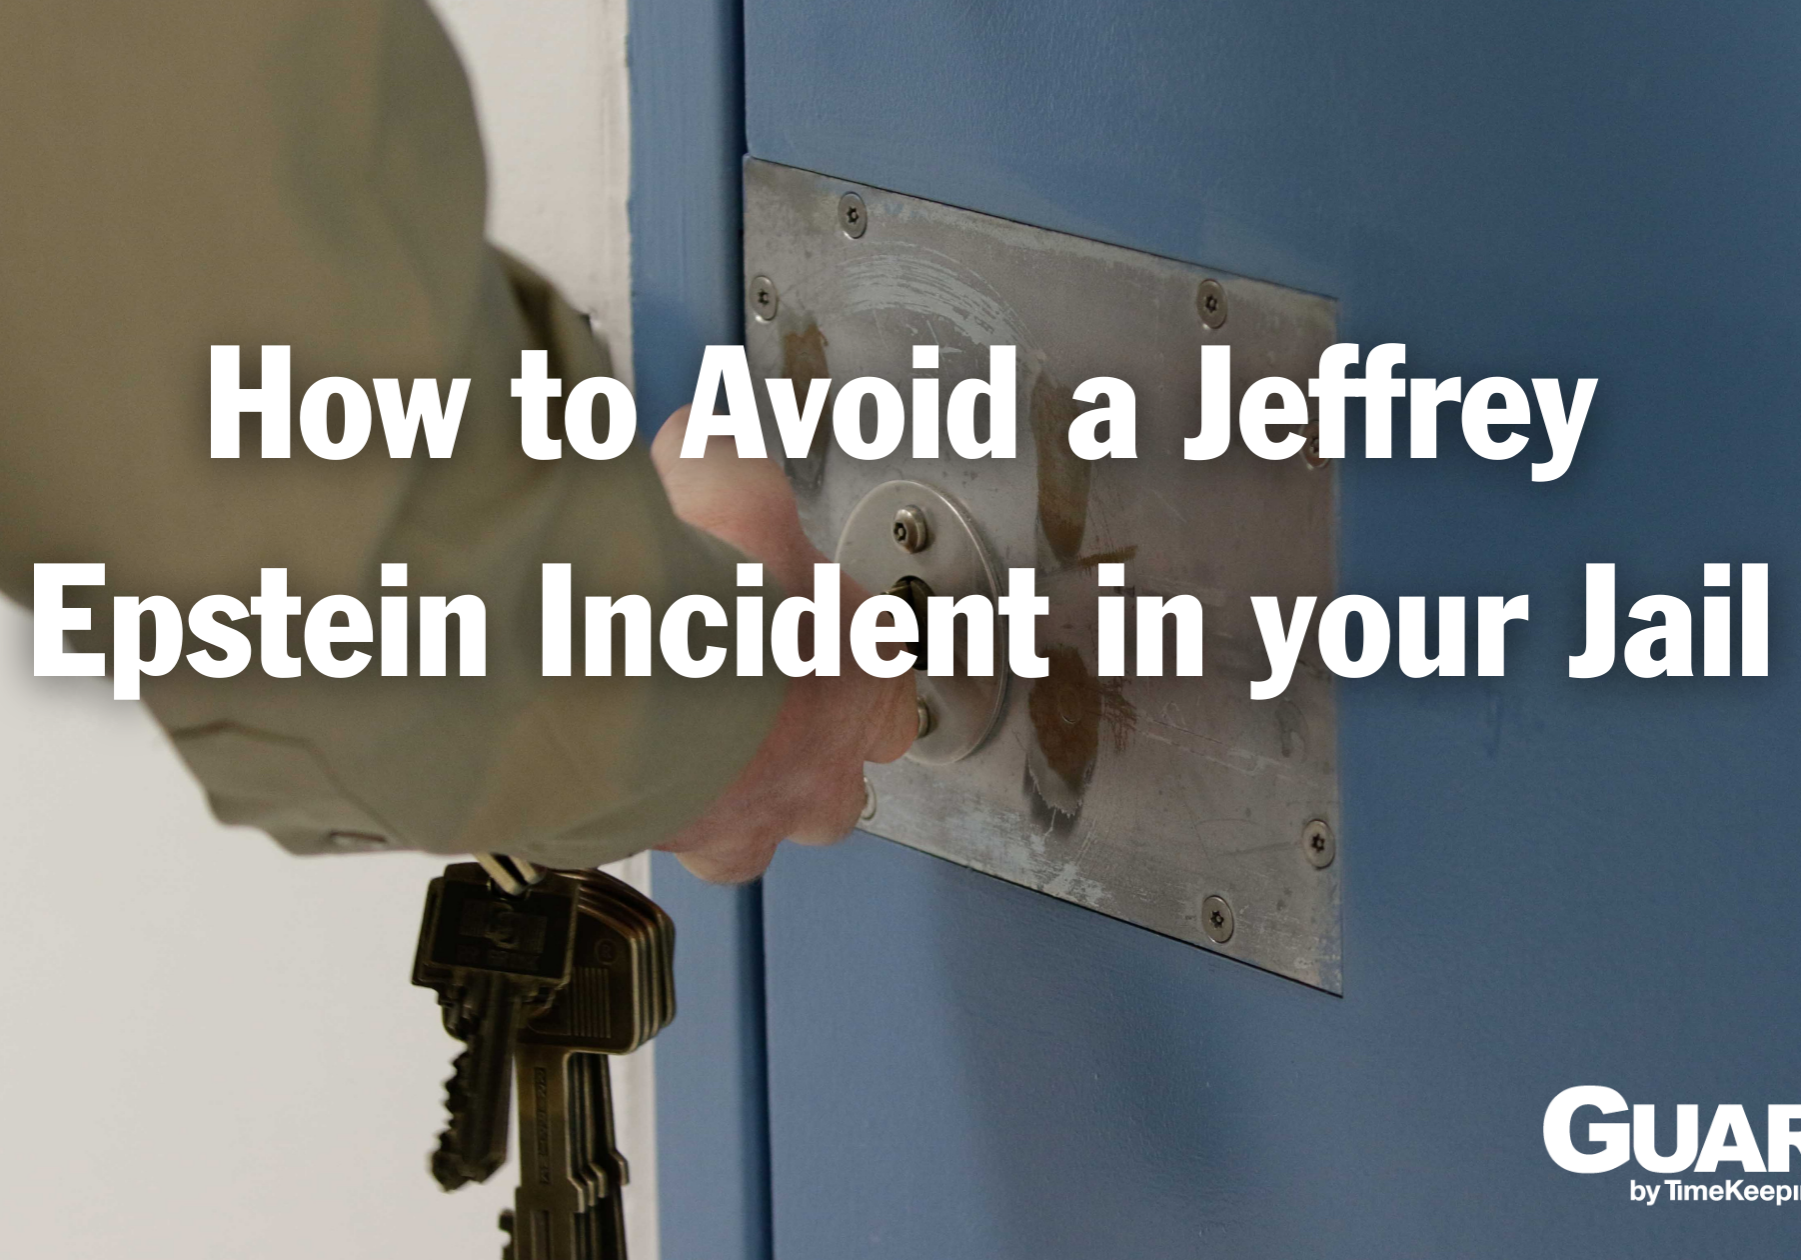 How-to-avoid-a-jeffrey-epstein-incident-in-your-jail